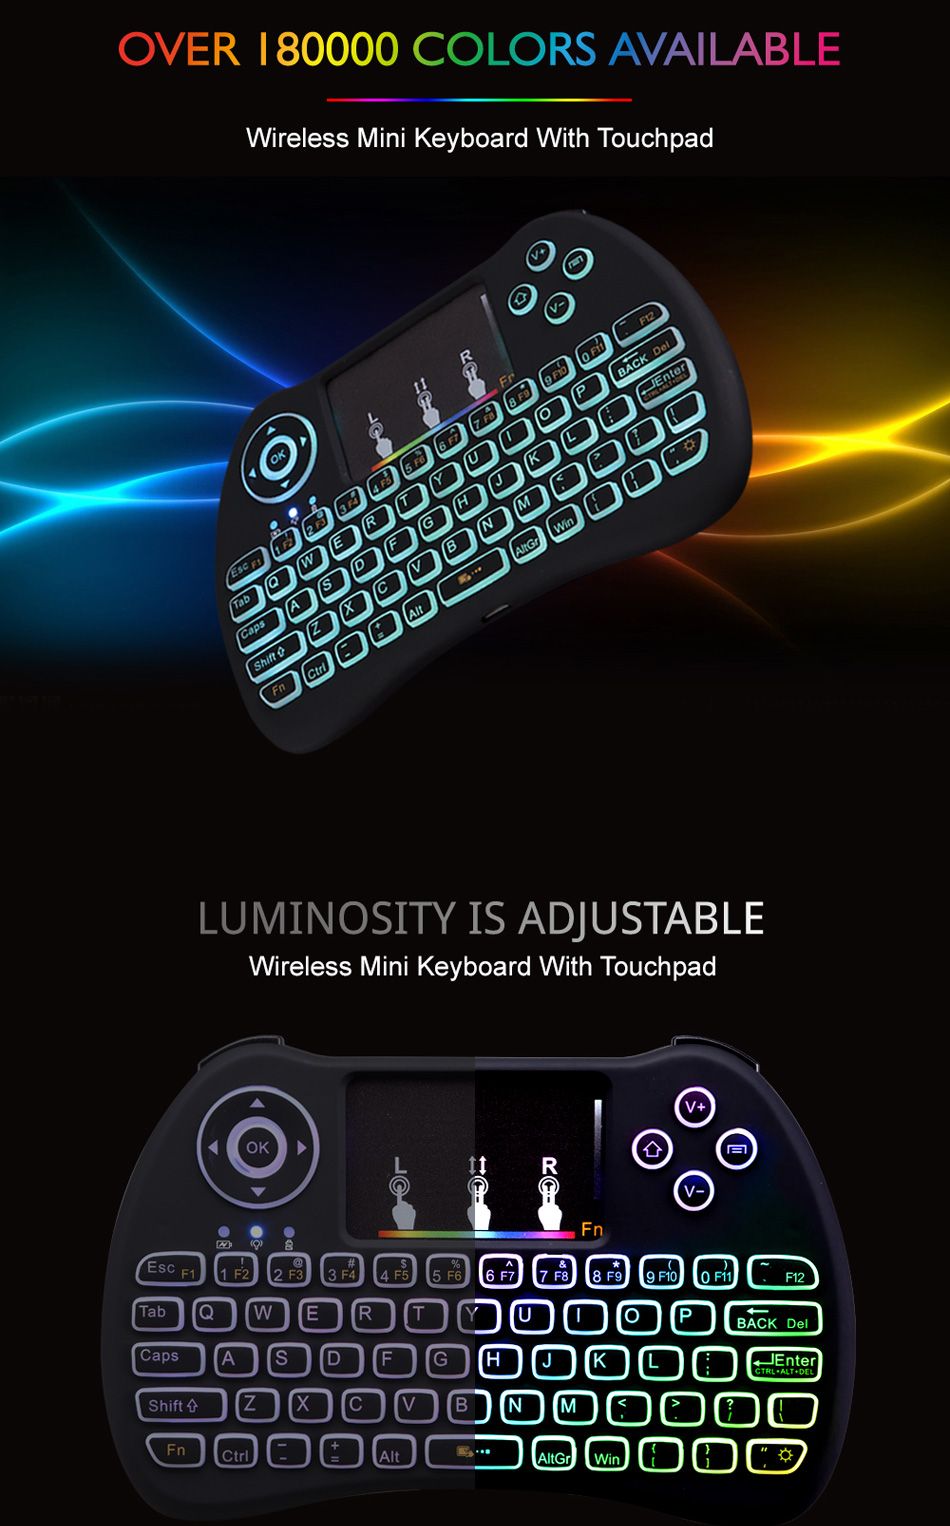 H9-Wireless-Colorful-Backlit-Ajustable-Brightness-24GHz-Touchpad-Air-Mouse-Mini-Keyboard-1148017